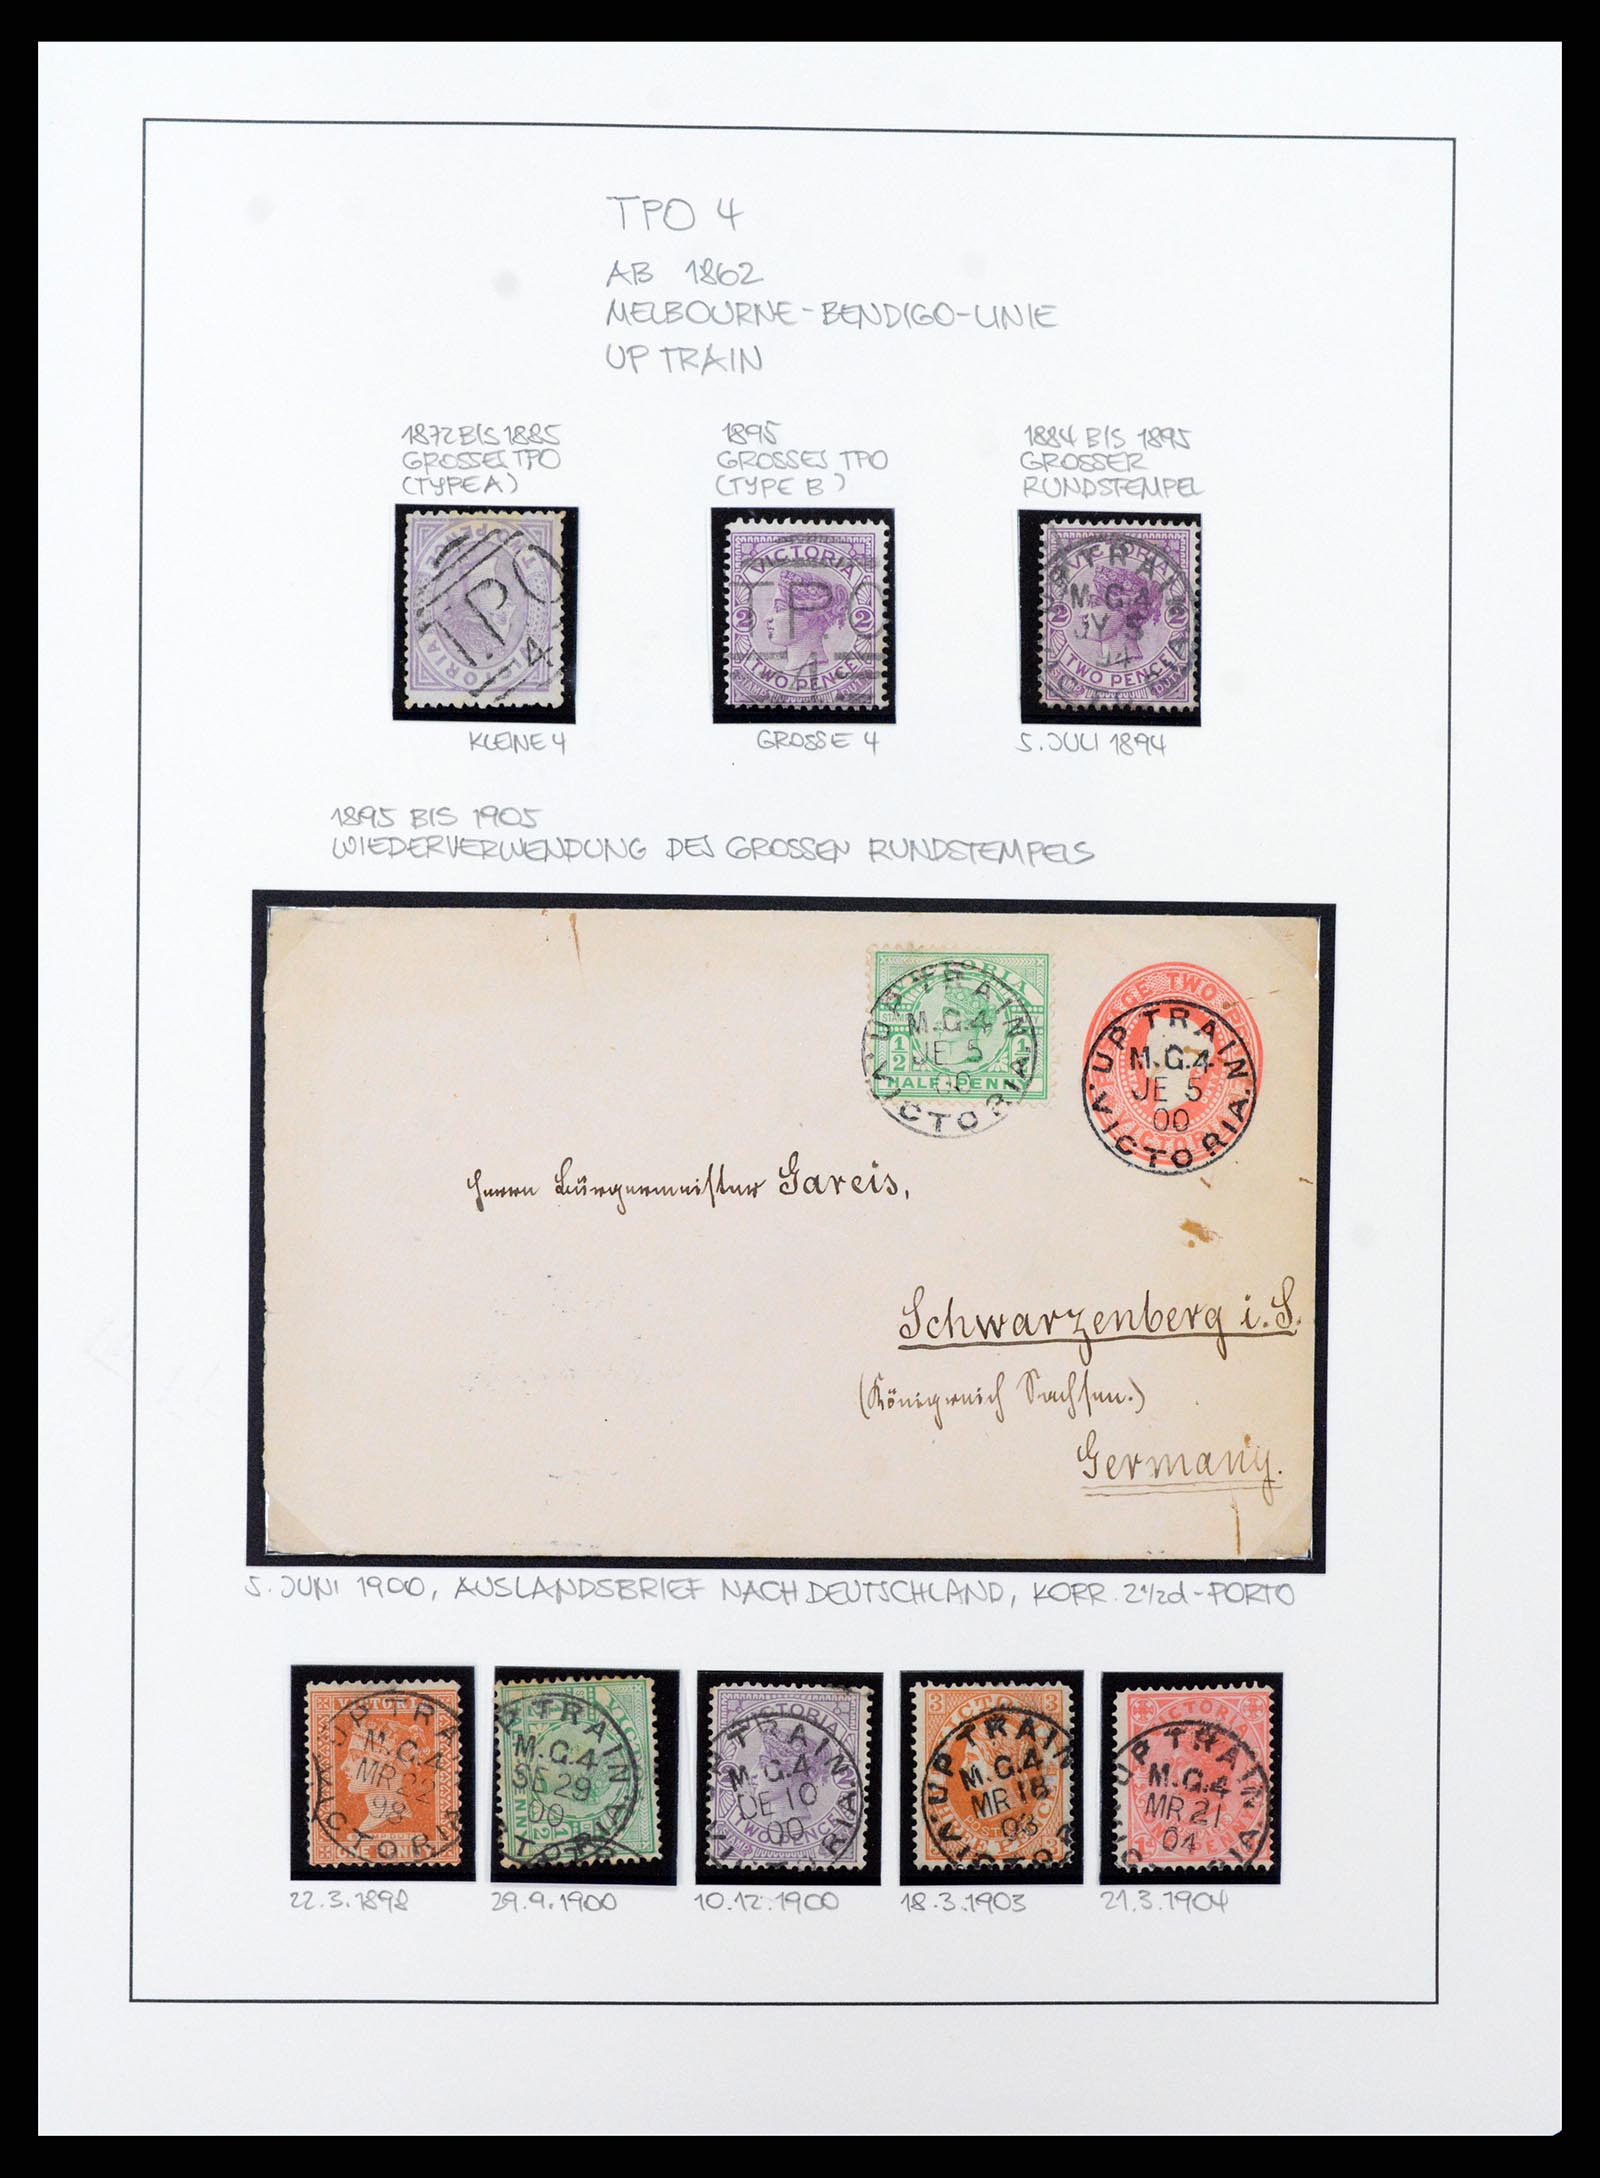 37514 007 - Stamp collection 37514 Victoria tpo cancellations 1865-1930.